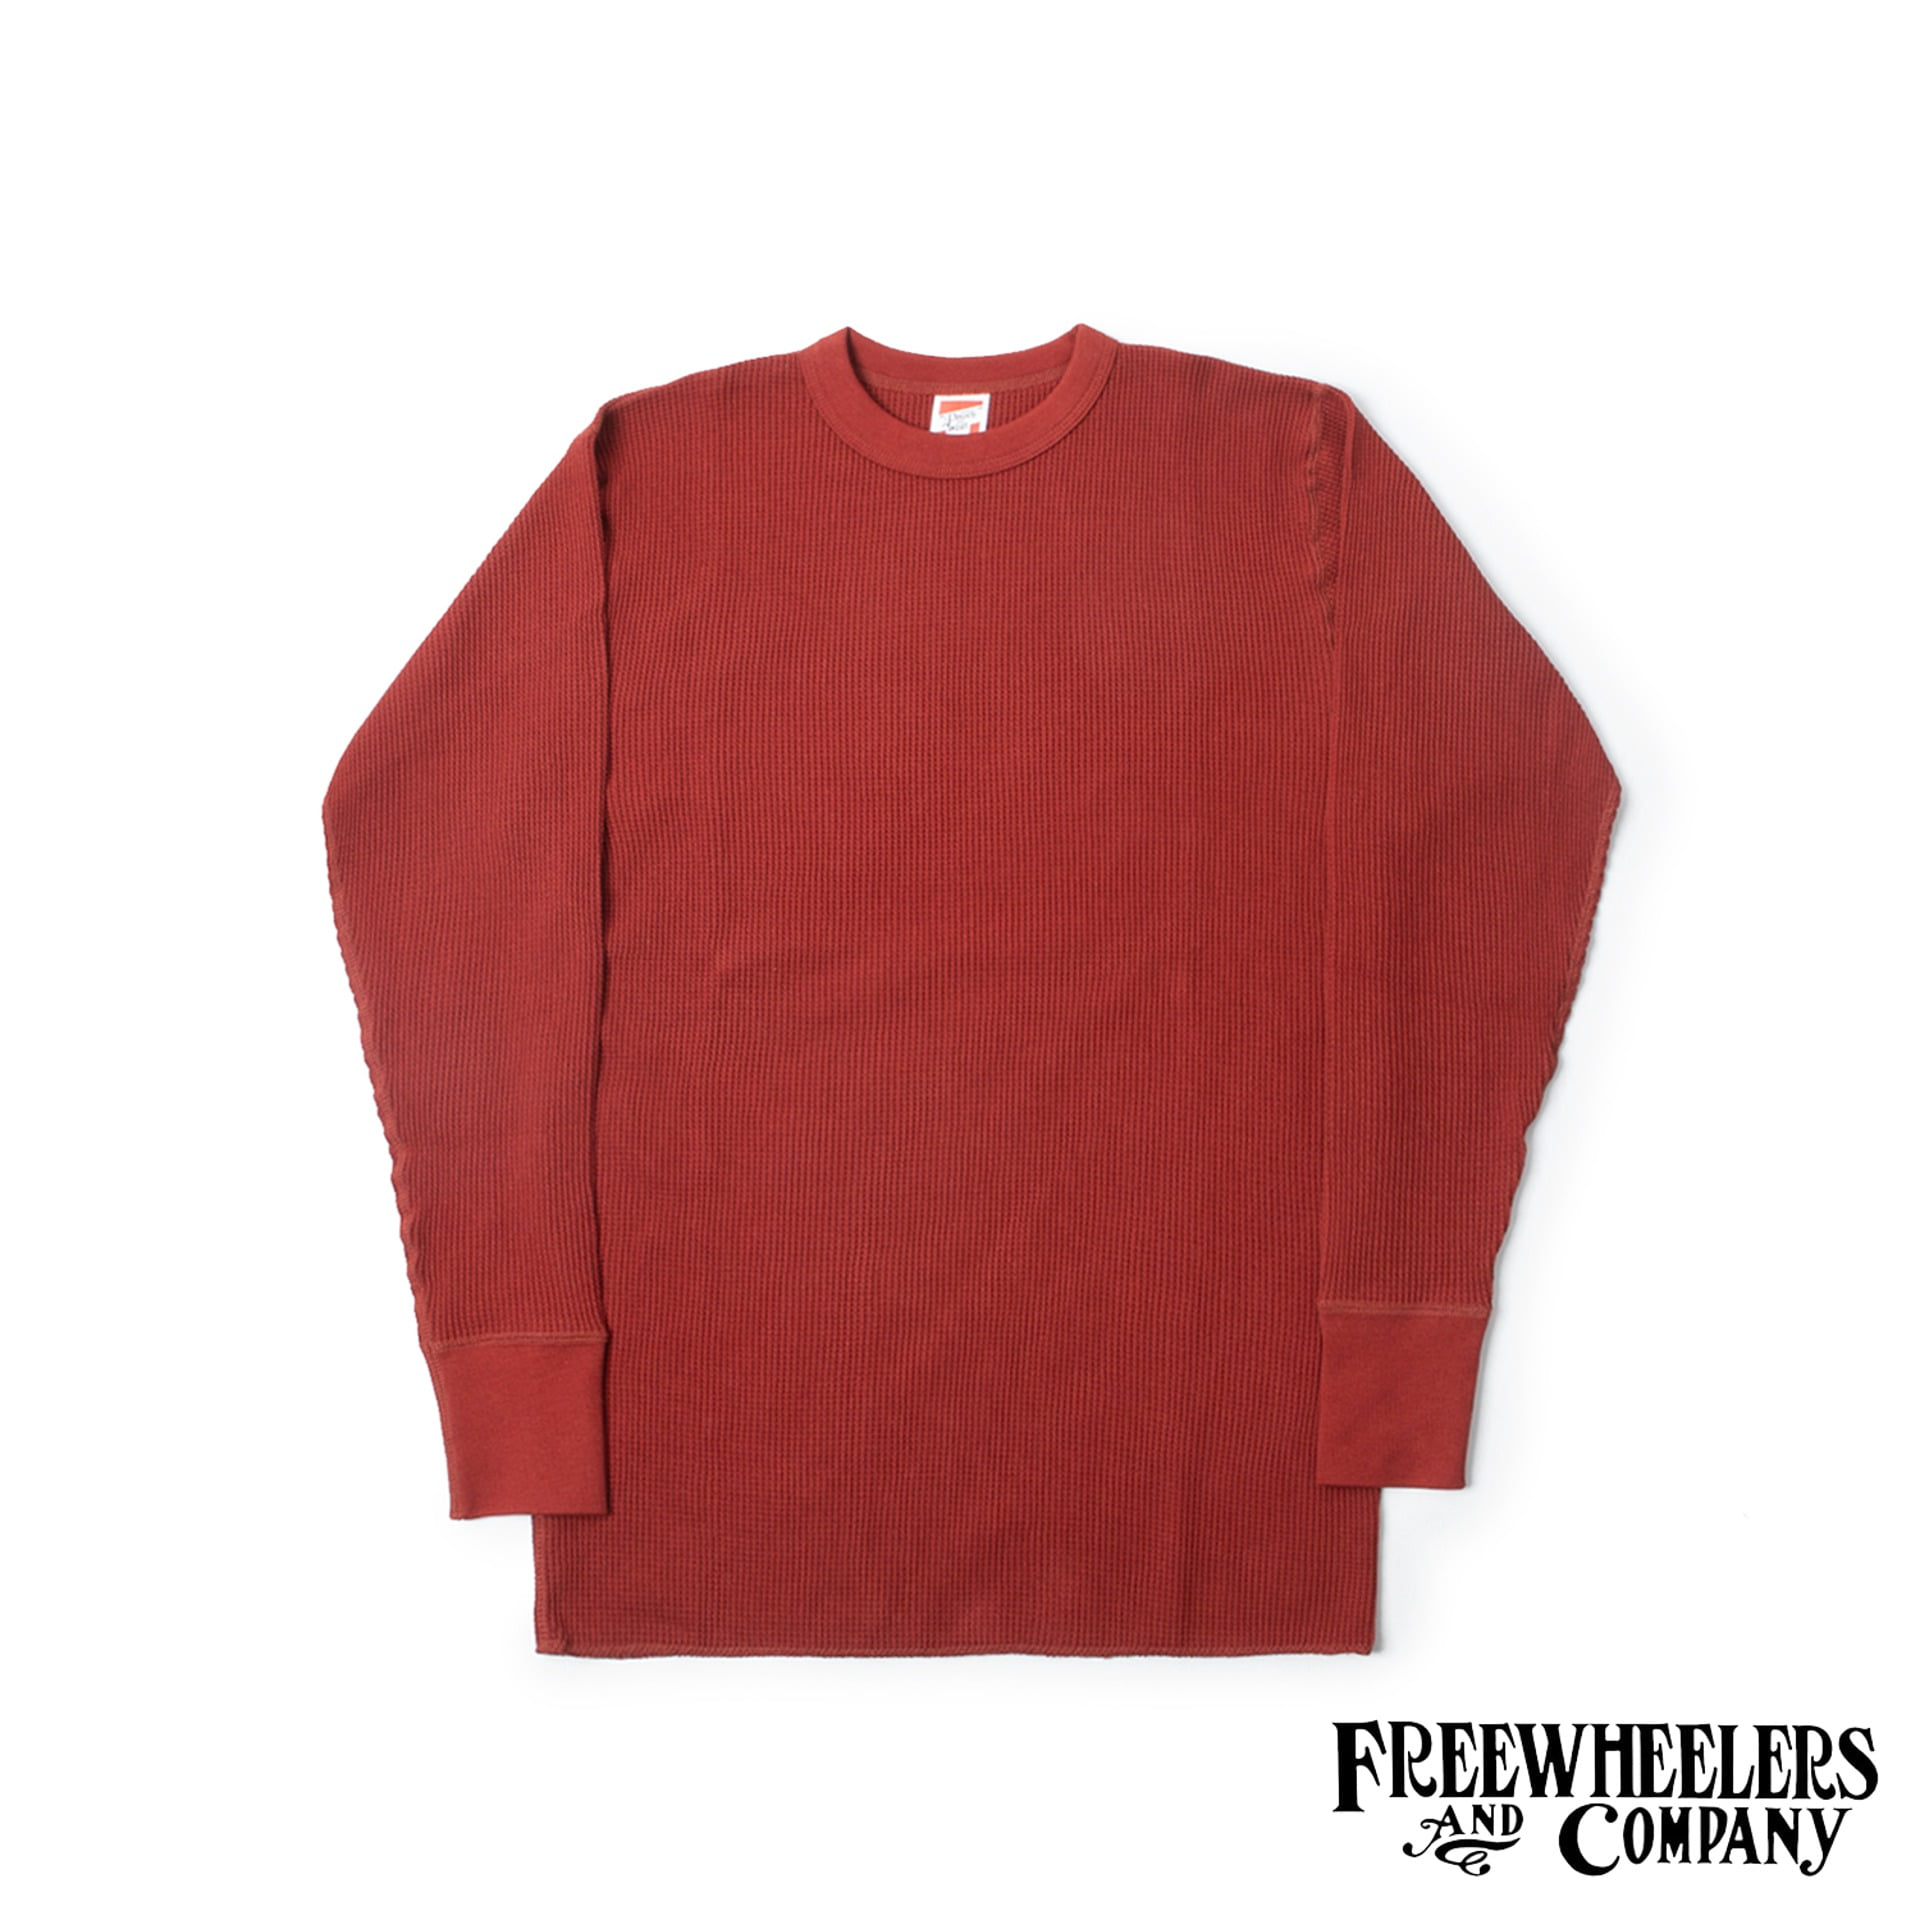 [POWER WEAR]1950s STYLE UNDERWEAR“CREW NECKED THERMAL”LONG SLEEVE SHIRT (Indian Red)